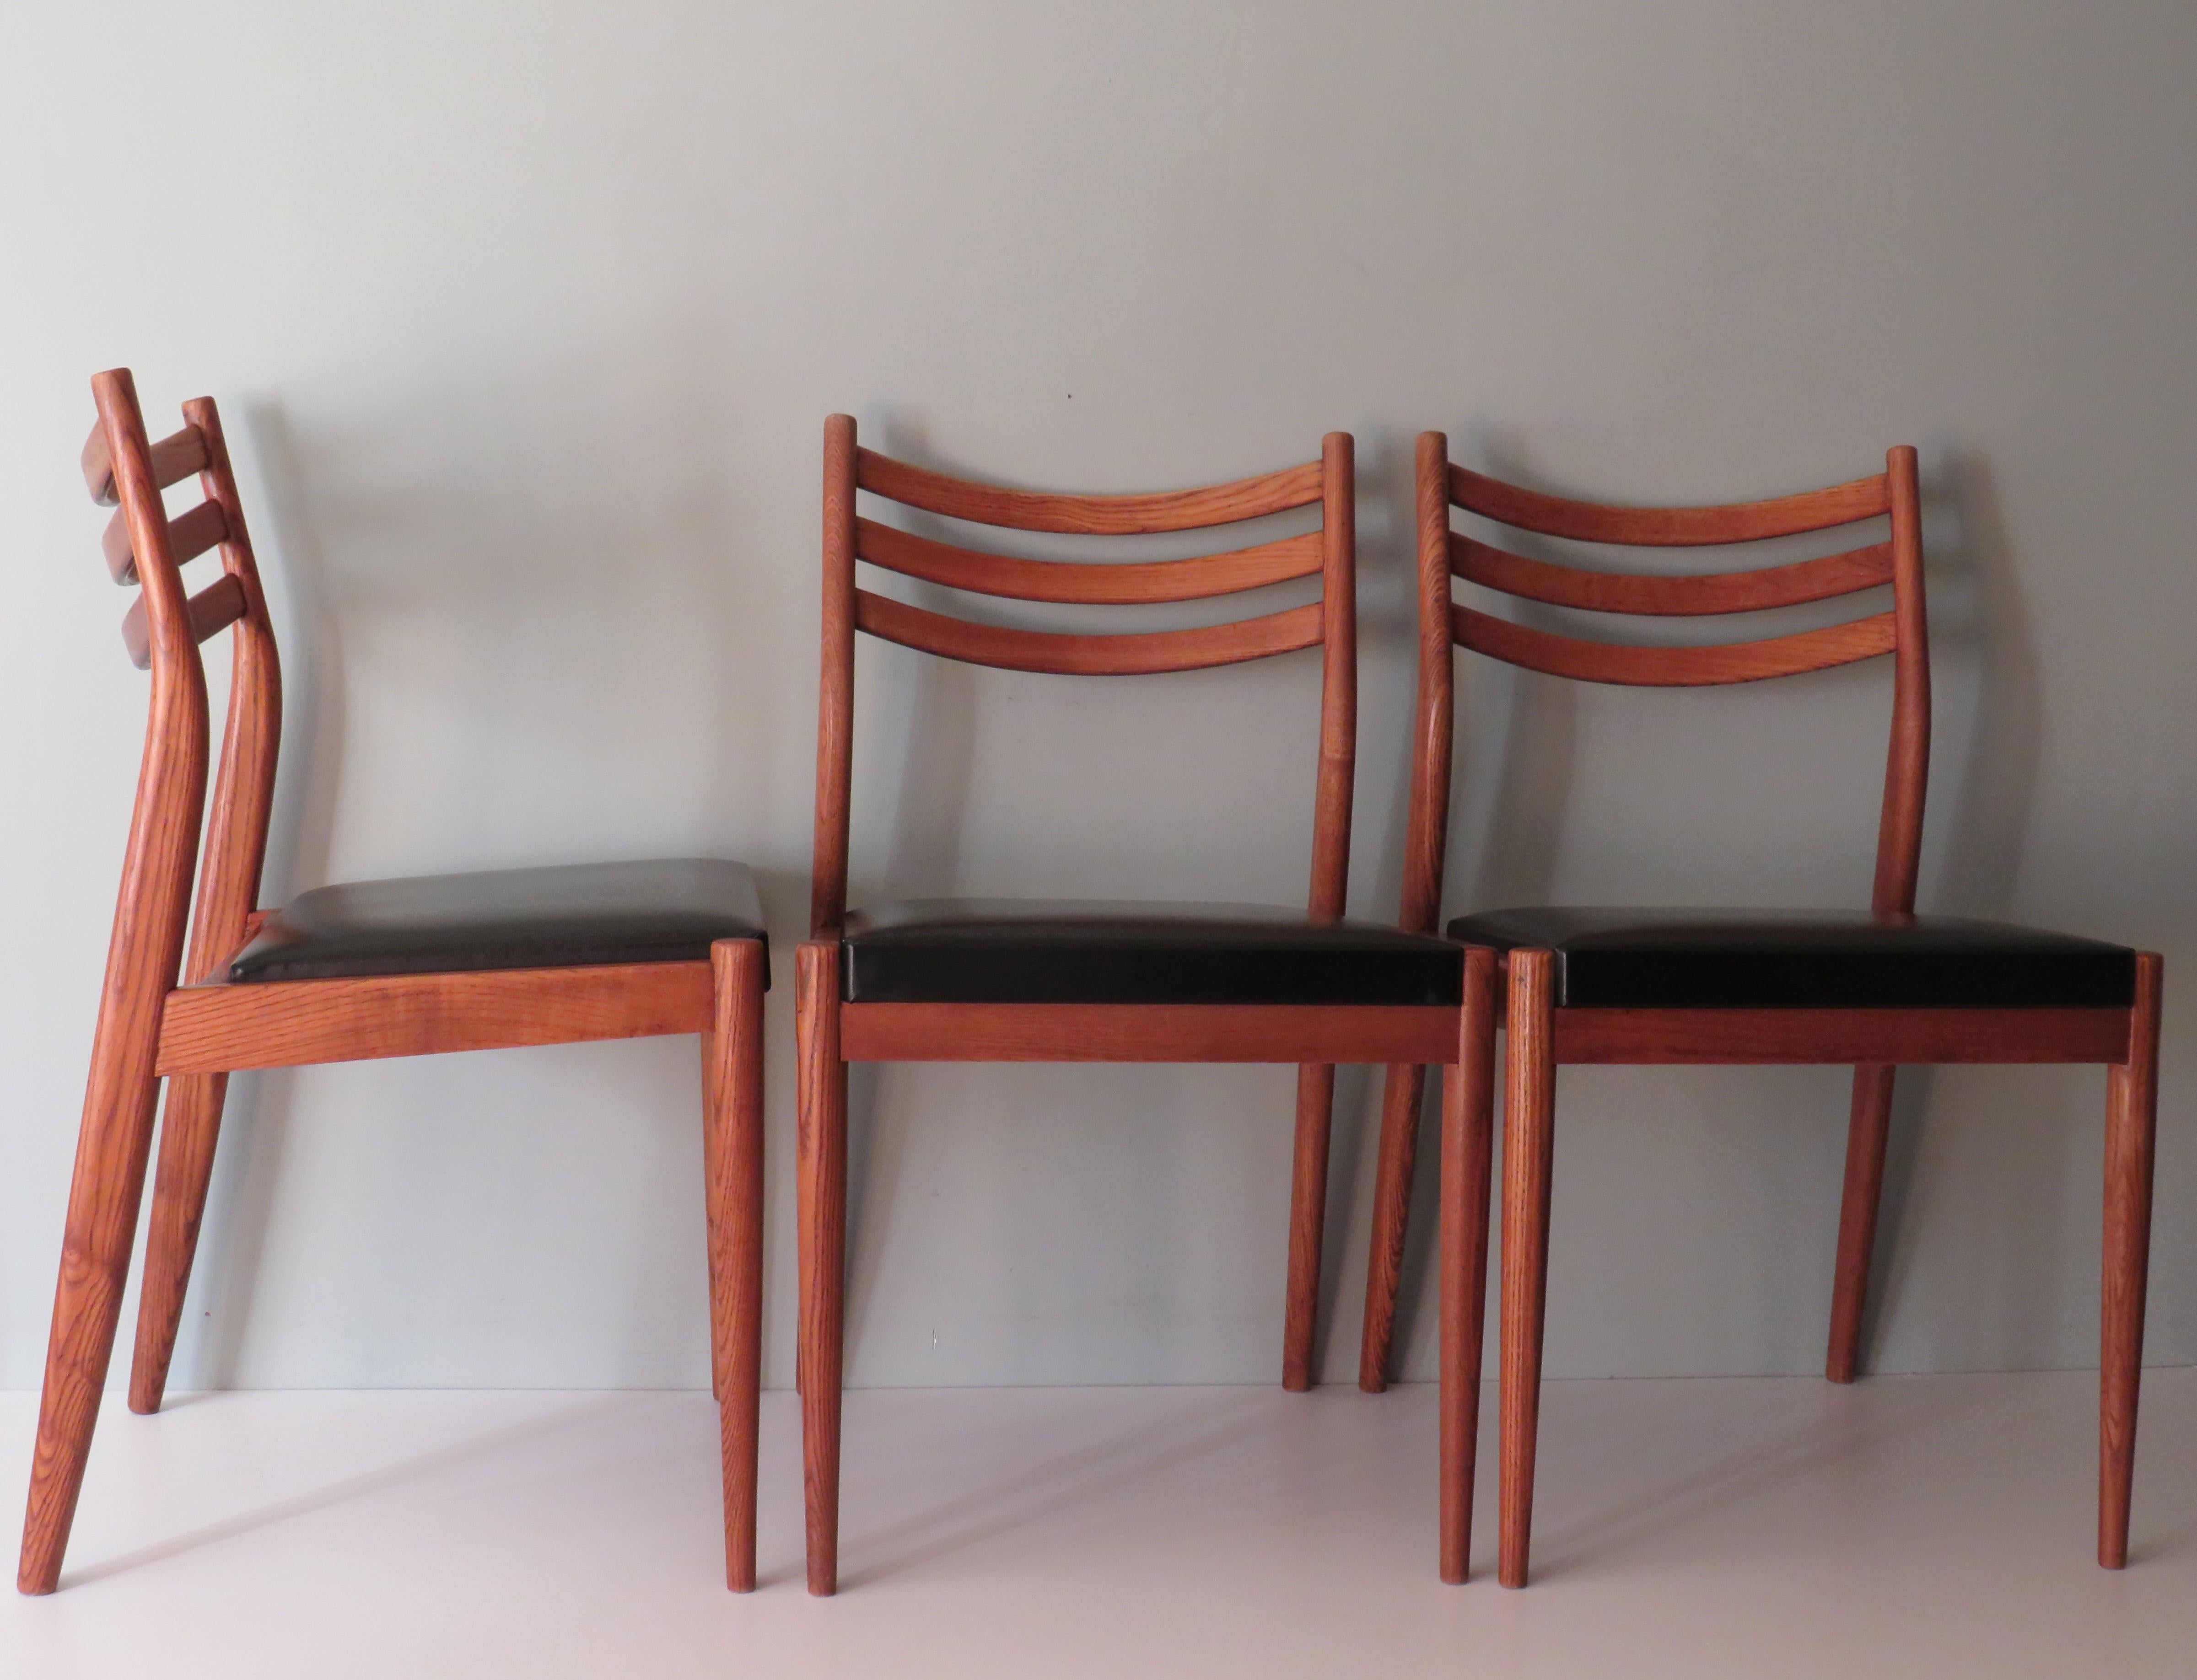 Mid-20th Century Set of 3 Teak Dining Room Chairs, Danish Design 1960-1970 For Sale